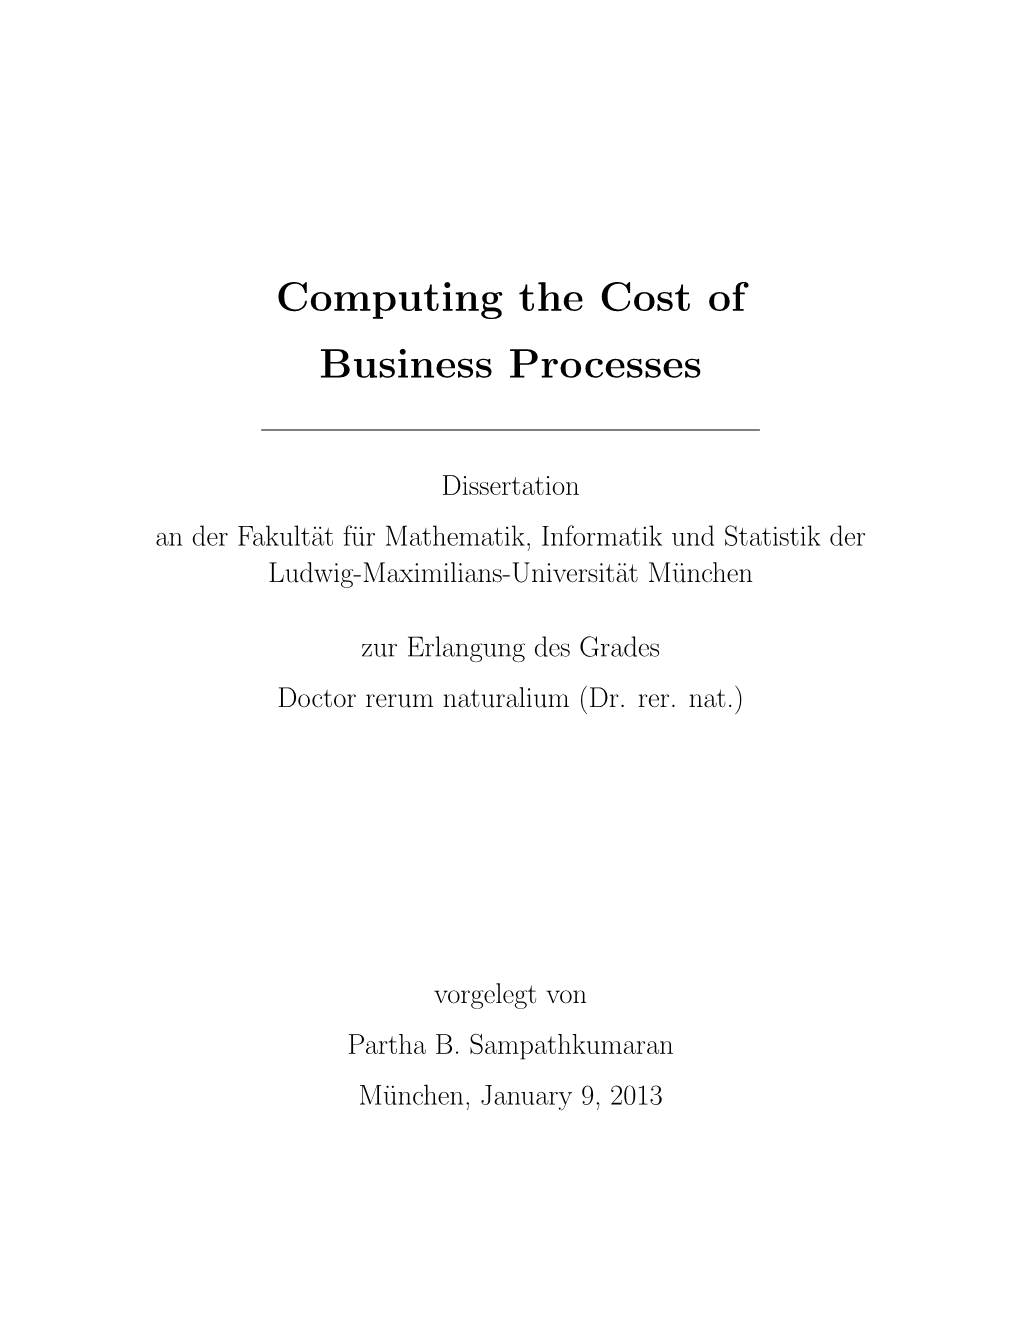 Computing the Cost of Business Processes